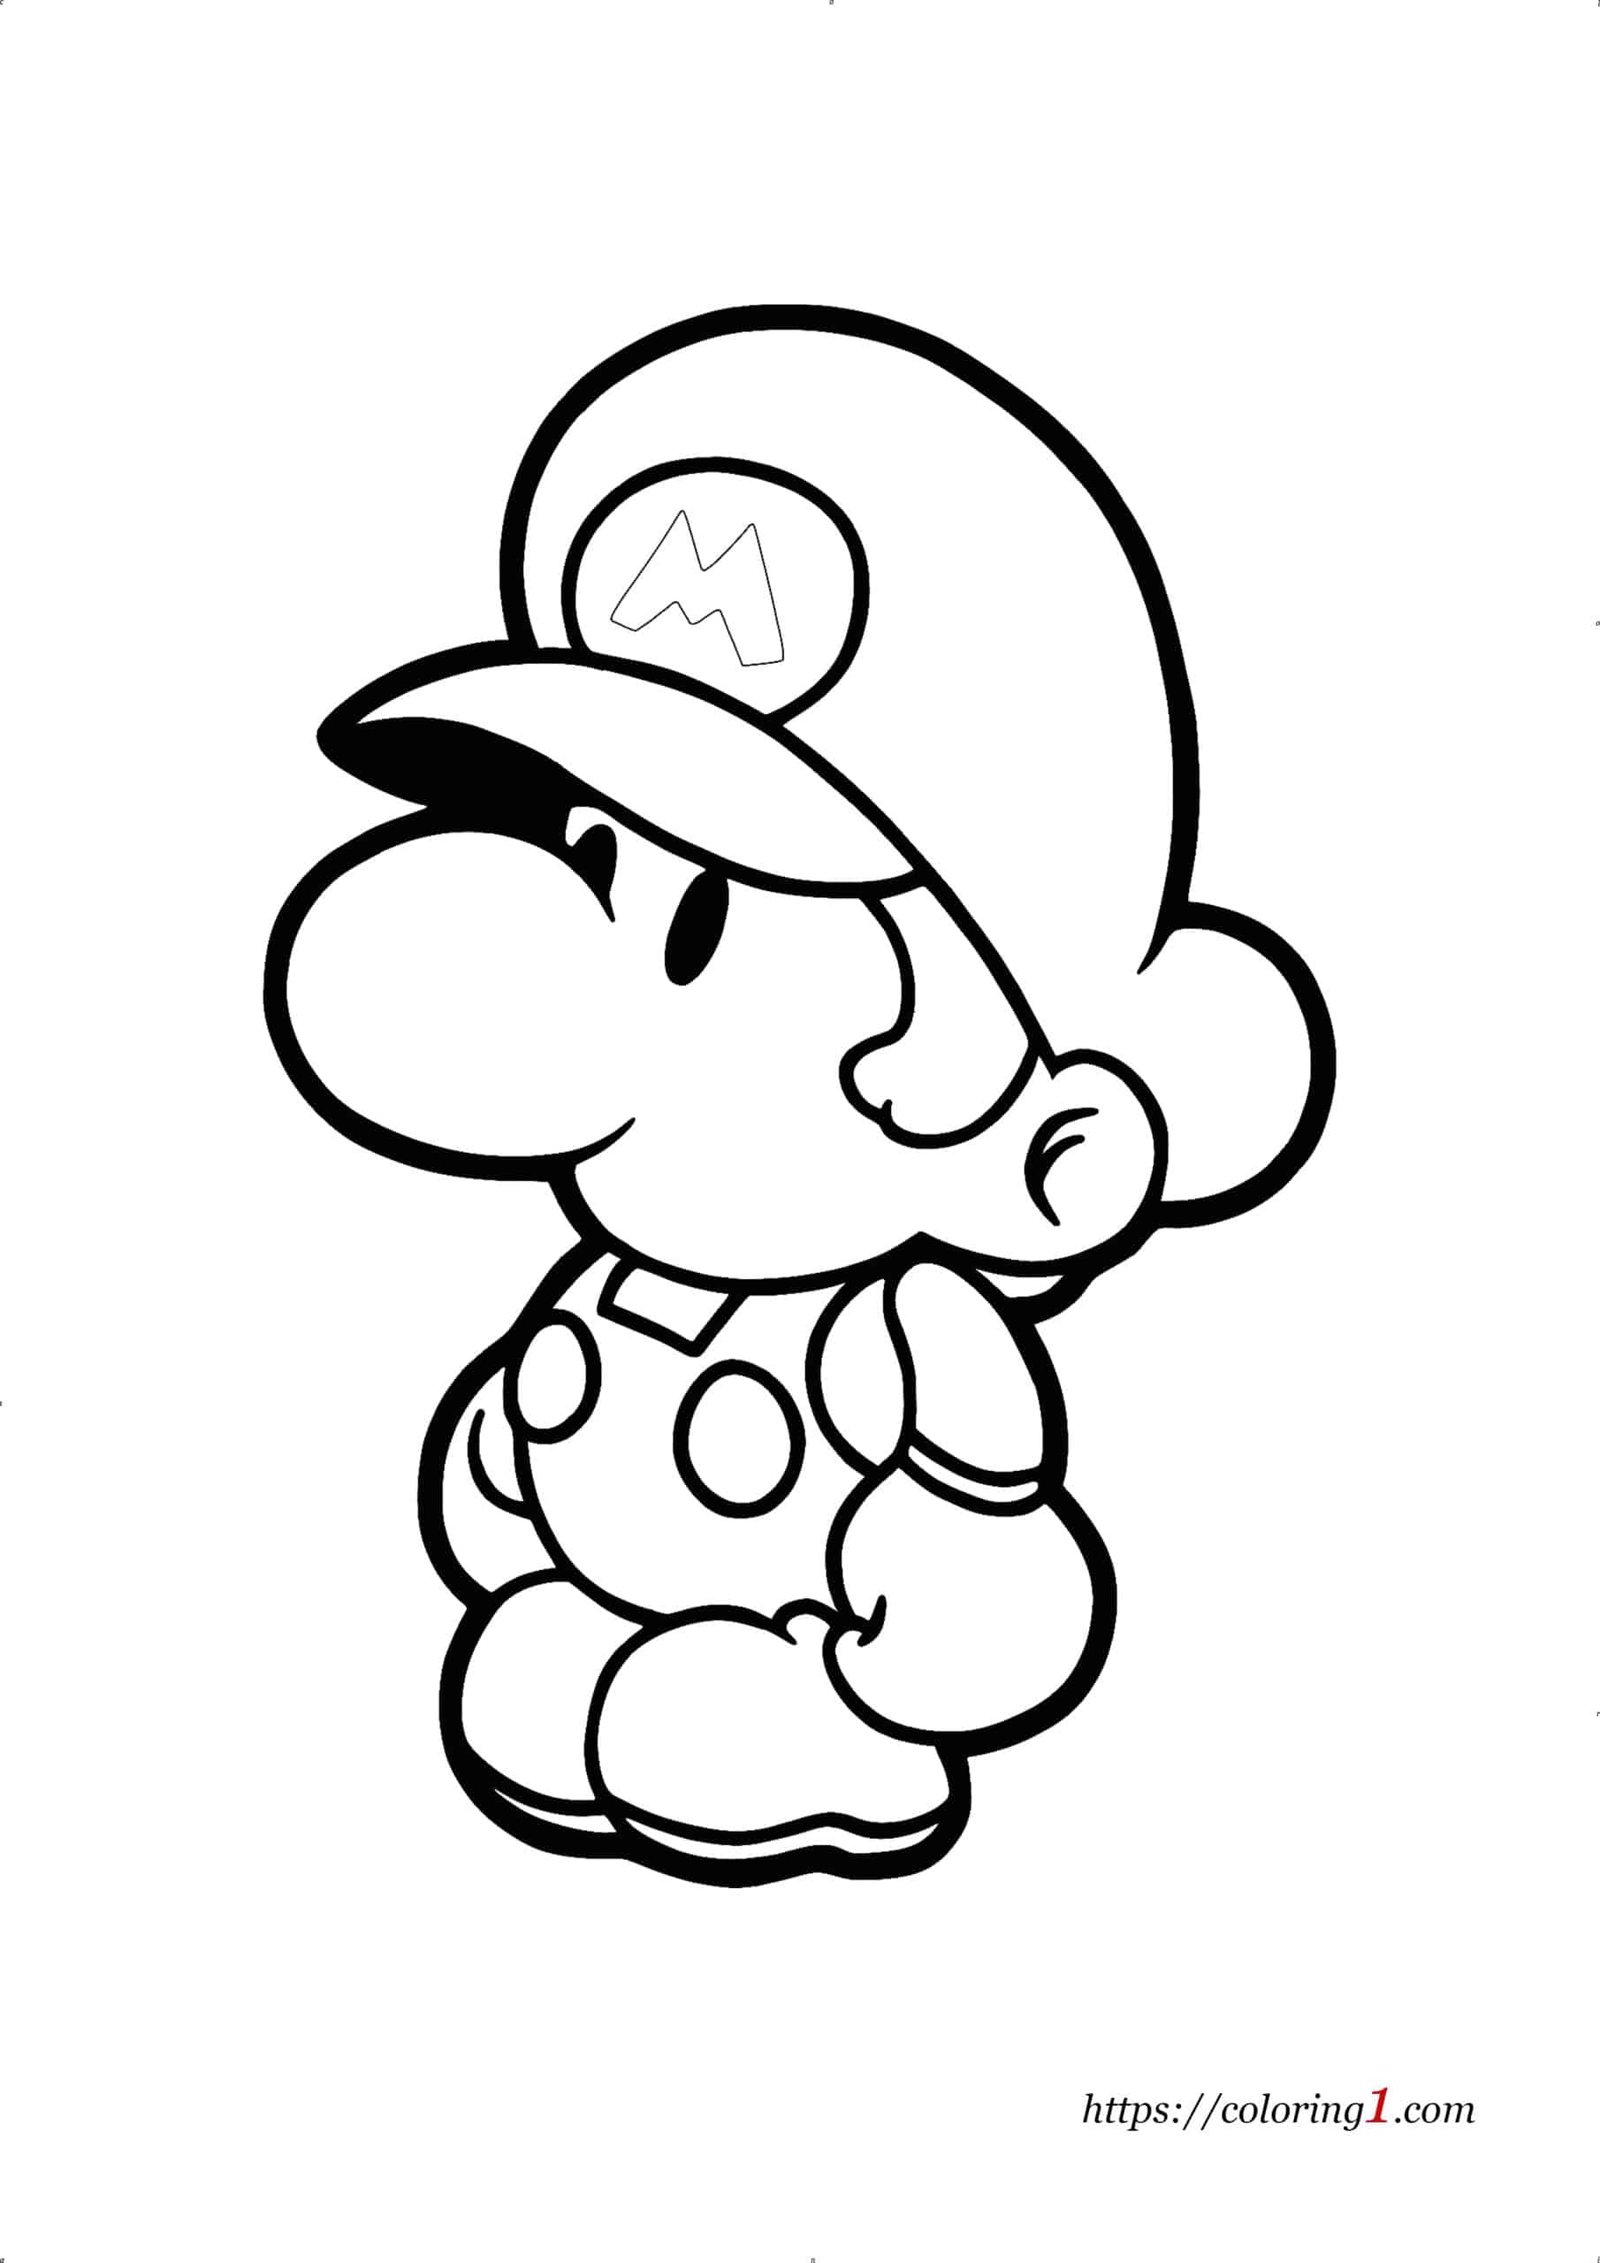 Baby Mario coloring page to print